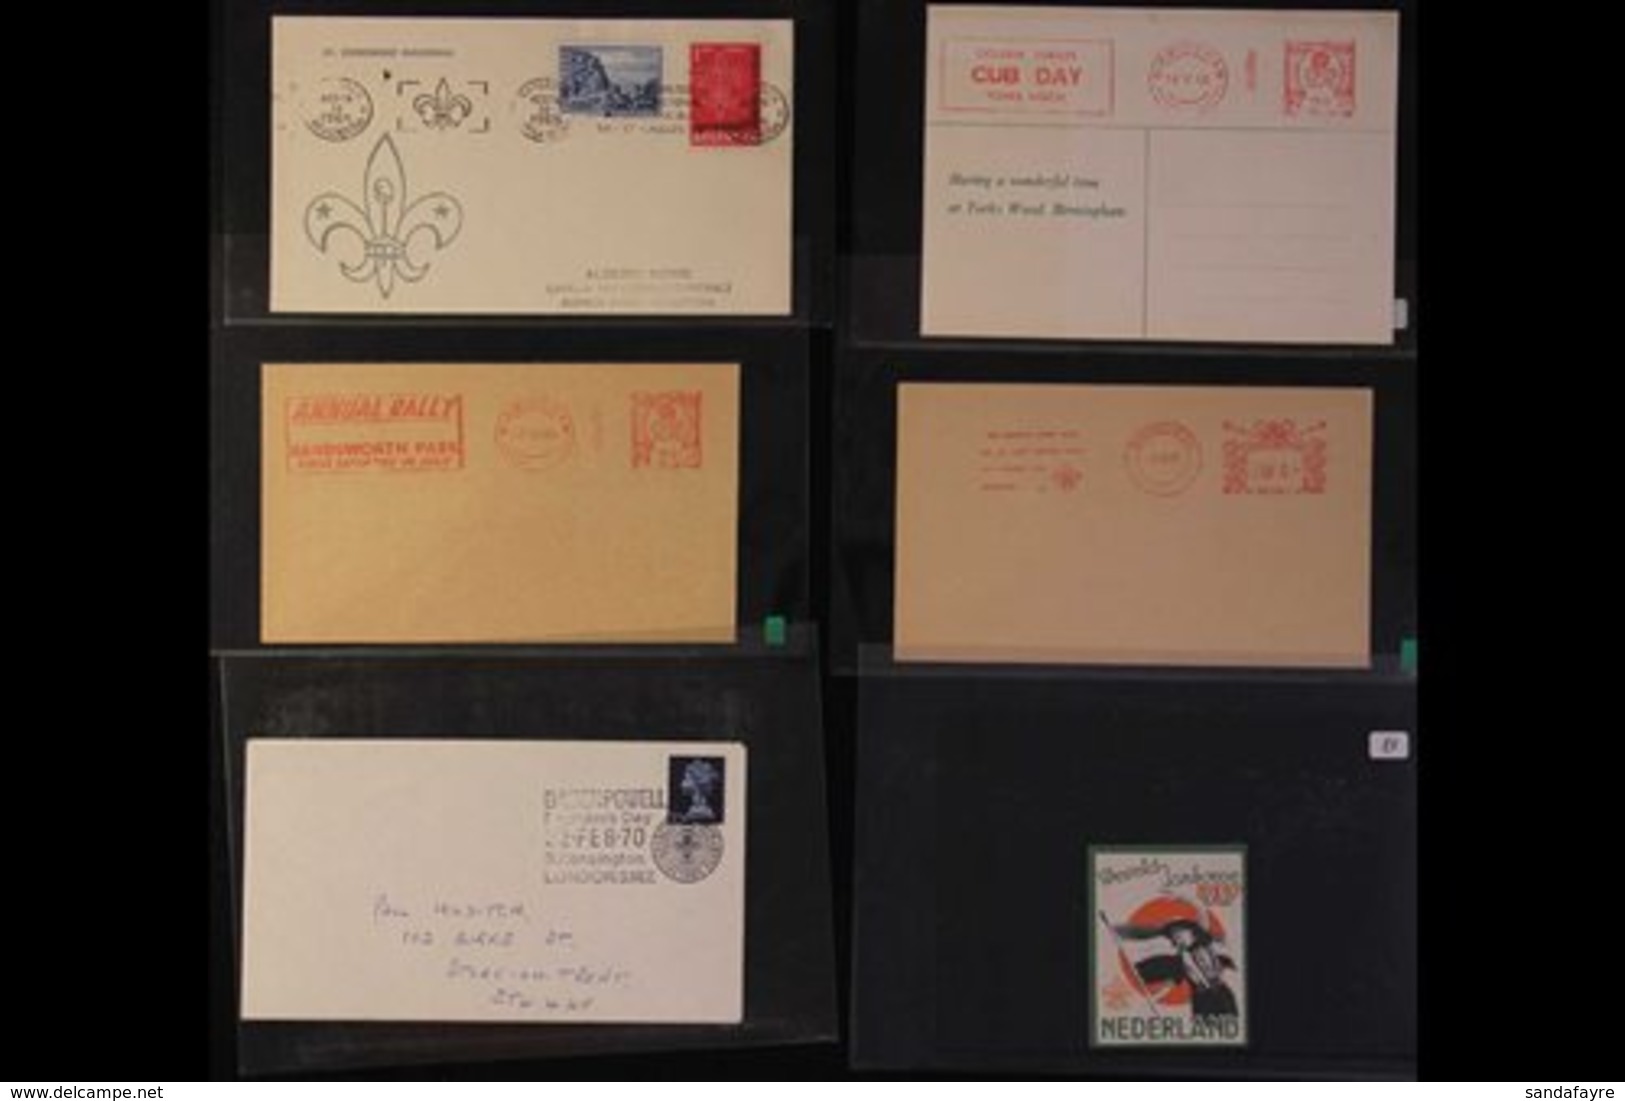 SCOUTS & GUIDES  CANCELLATIONS & METER MAIL - All With A Scouting Theme, We See A Range Of 1960s/70s Covers And Postcard - Unclassified